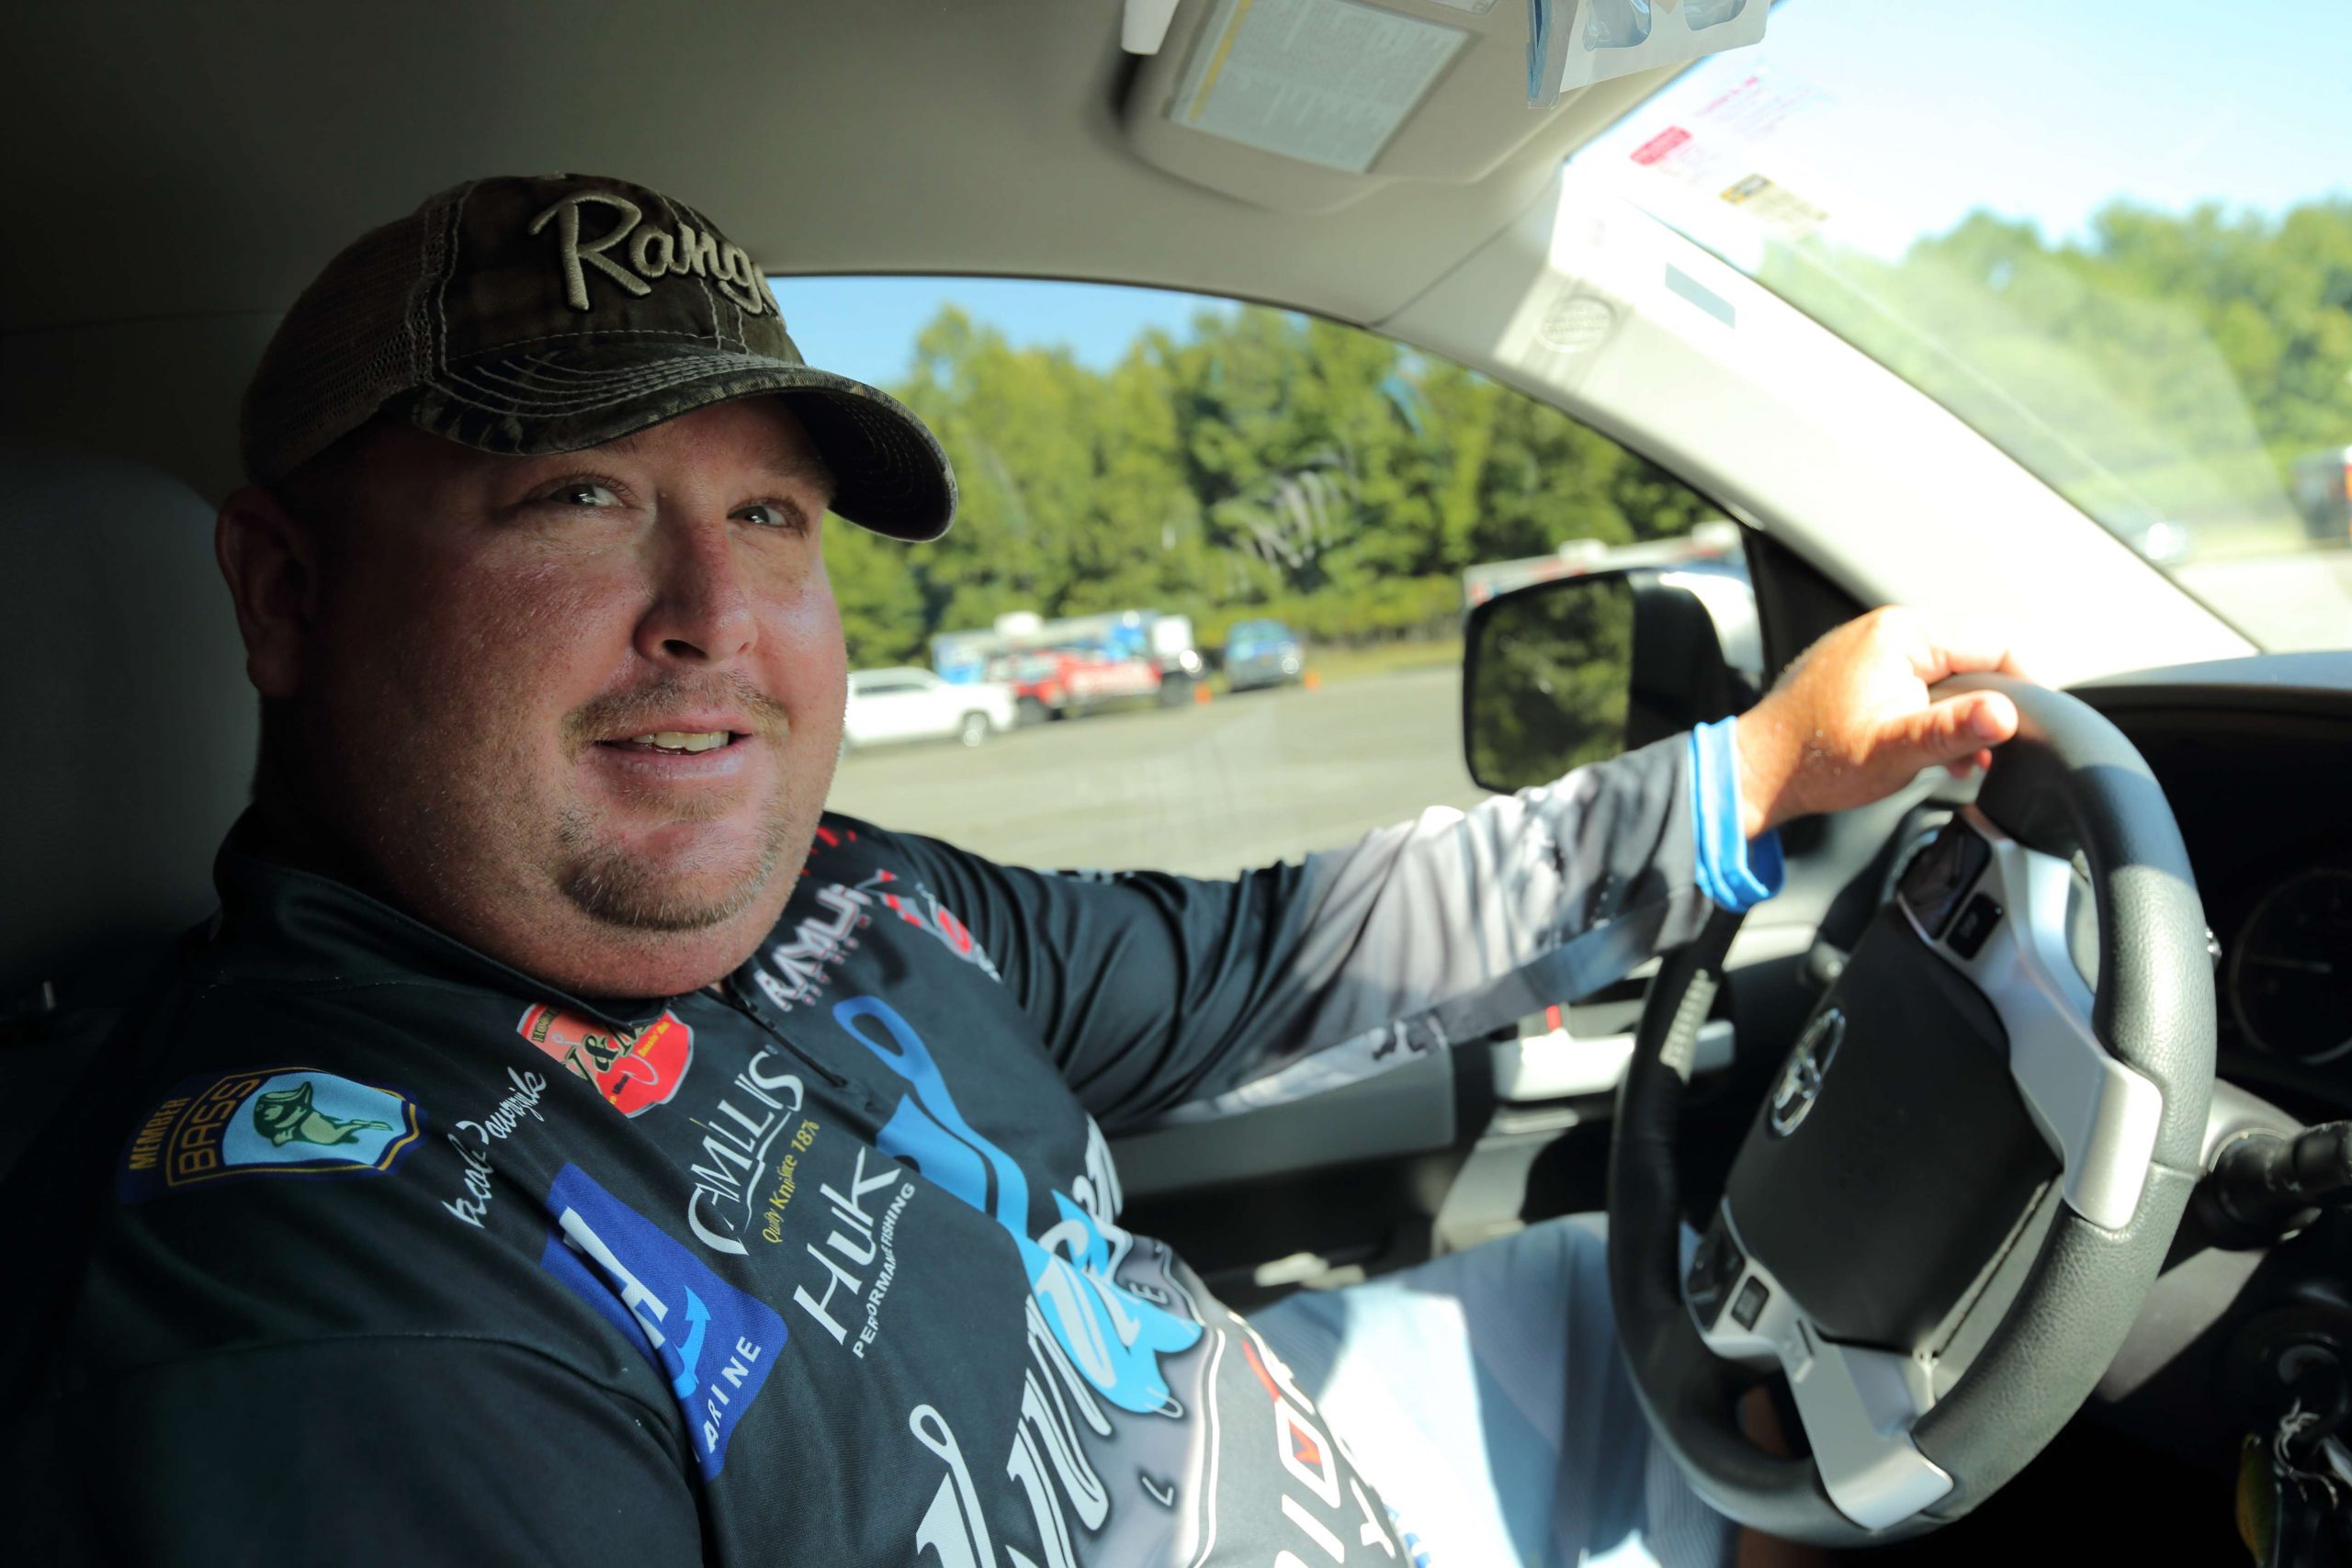 Powroznik uses his Tundra for everything. From going out on dates, to duck hunting, to bass and saltwater fishing. âItâs just an all around truck,â Powroznik said. 